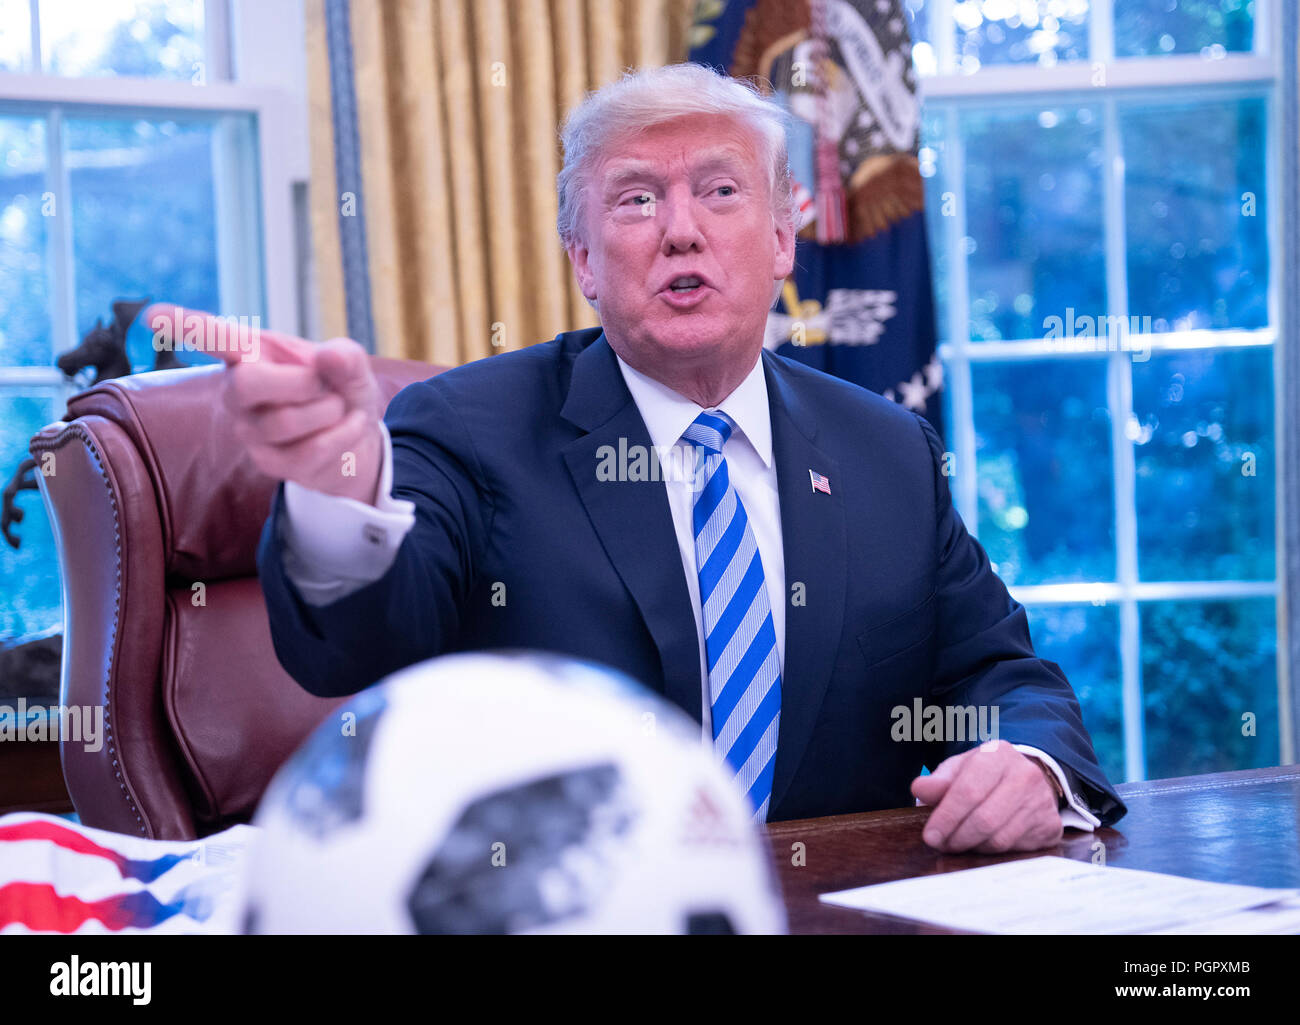 United States President Donald J. Trump, makes remarks as he meets with Gianni Infantino, left, President of Fédération Internationale de Football Association (FIFA) in the Oval Office of the White House in Washington, DC on Tuesday, August 28, 2018. FIFA describes itself as an international governing body of association football, futsal, and beach soccer. Credit: Ron Sachs/CNP /MediaPunch Stock Photo